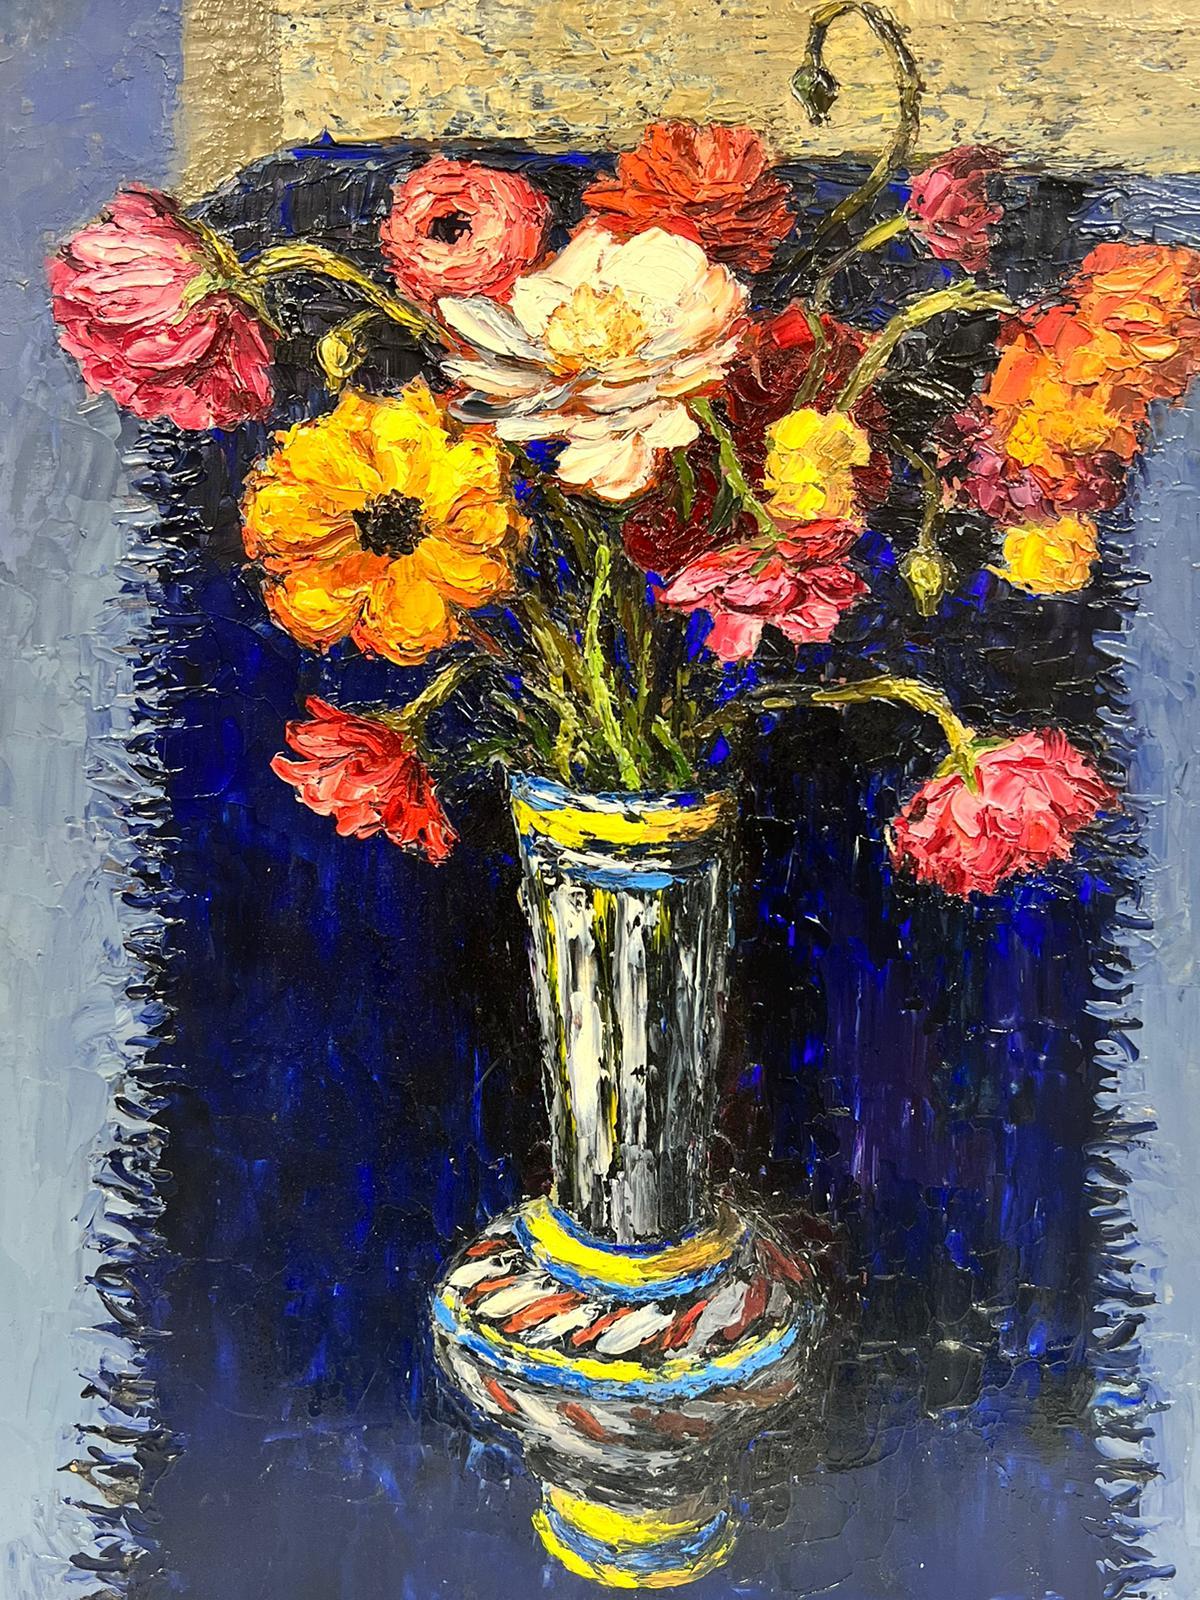 Flowers in a Vase, circa 1960's
by Josine Vignon (French 1922-2022) 
signed
oil painting on board, unframed
board: 16 x 13 inches
very good condition 
provenance: from the artists estate, France

Josine Vignon (1922-2022) was a French artist living